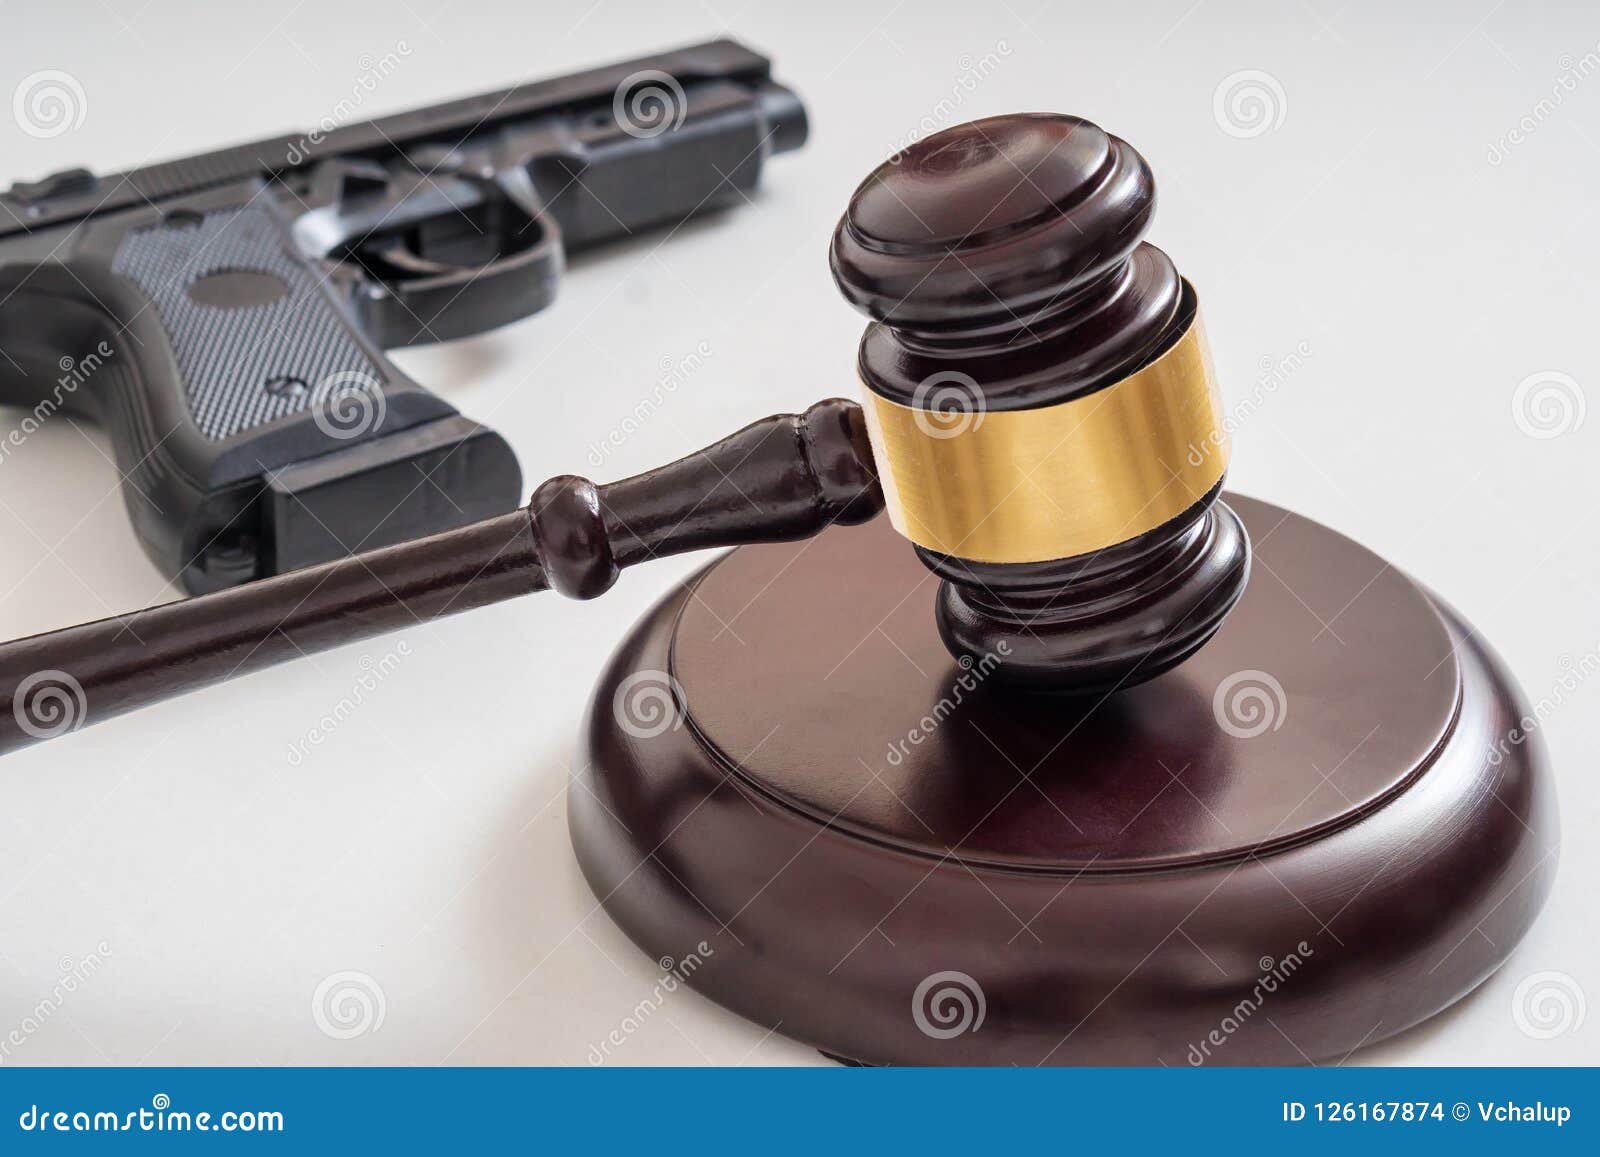 gavel in front of a pistol. gun laws and legislation concept